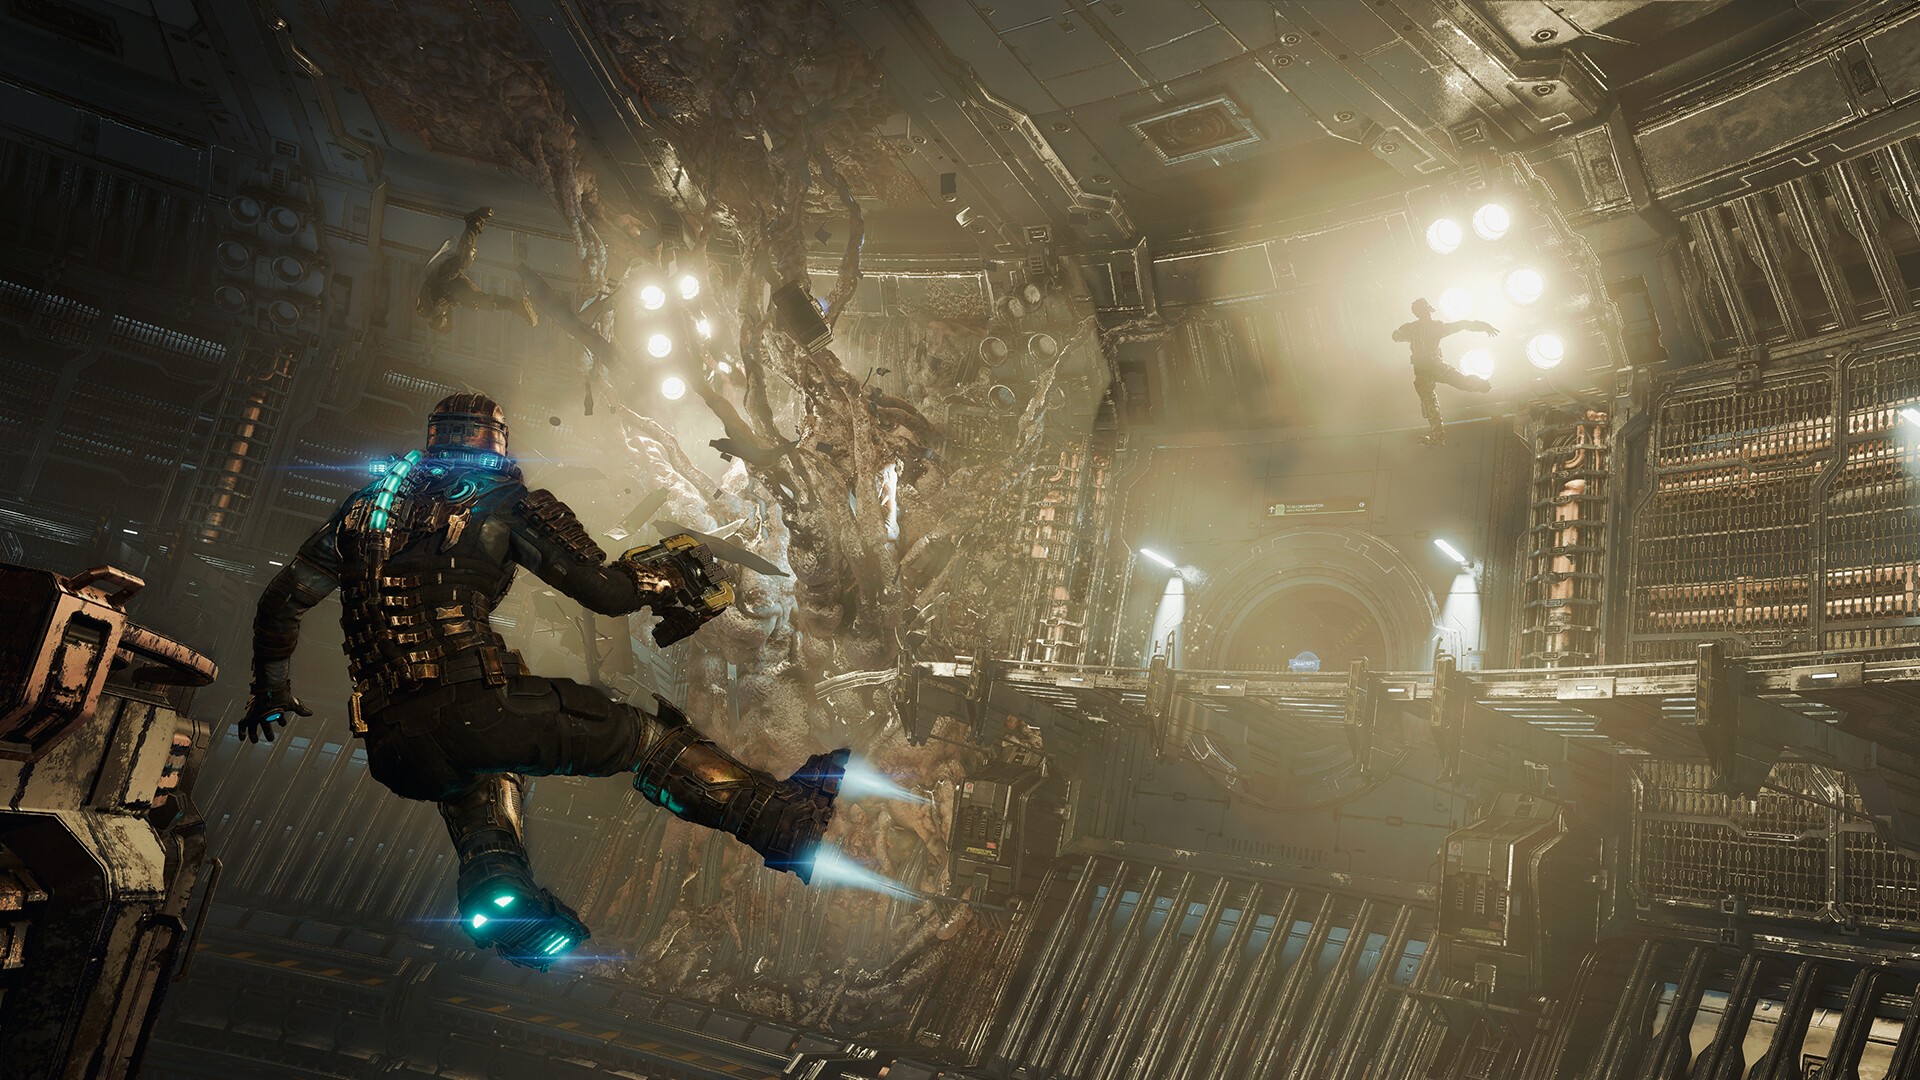 Dead Space' Is Back, And 'Dead Space' Still Kicks Ass